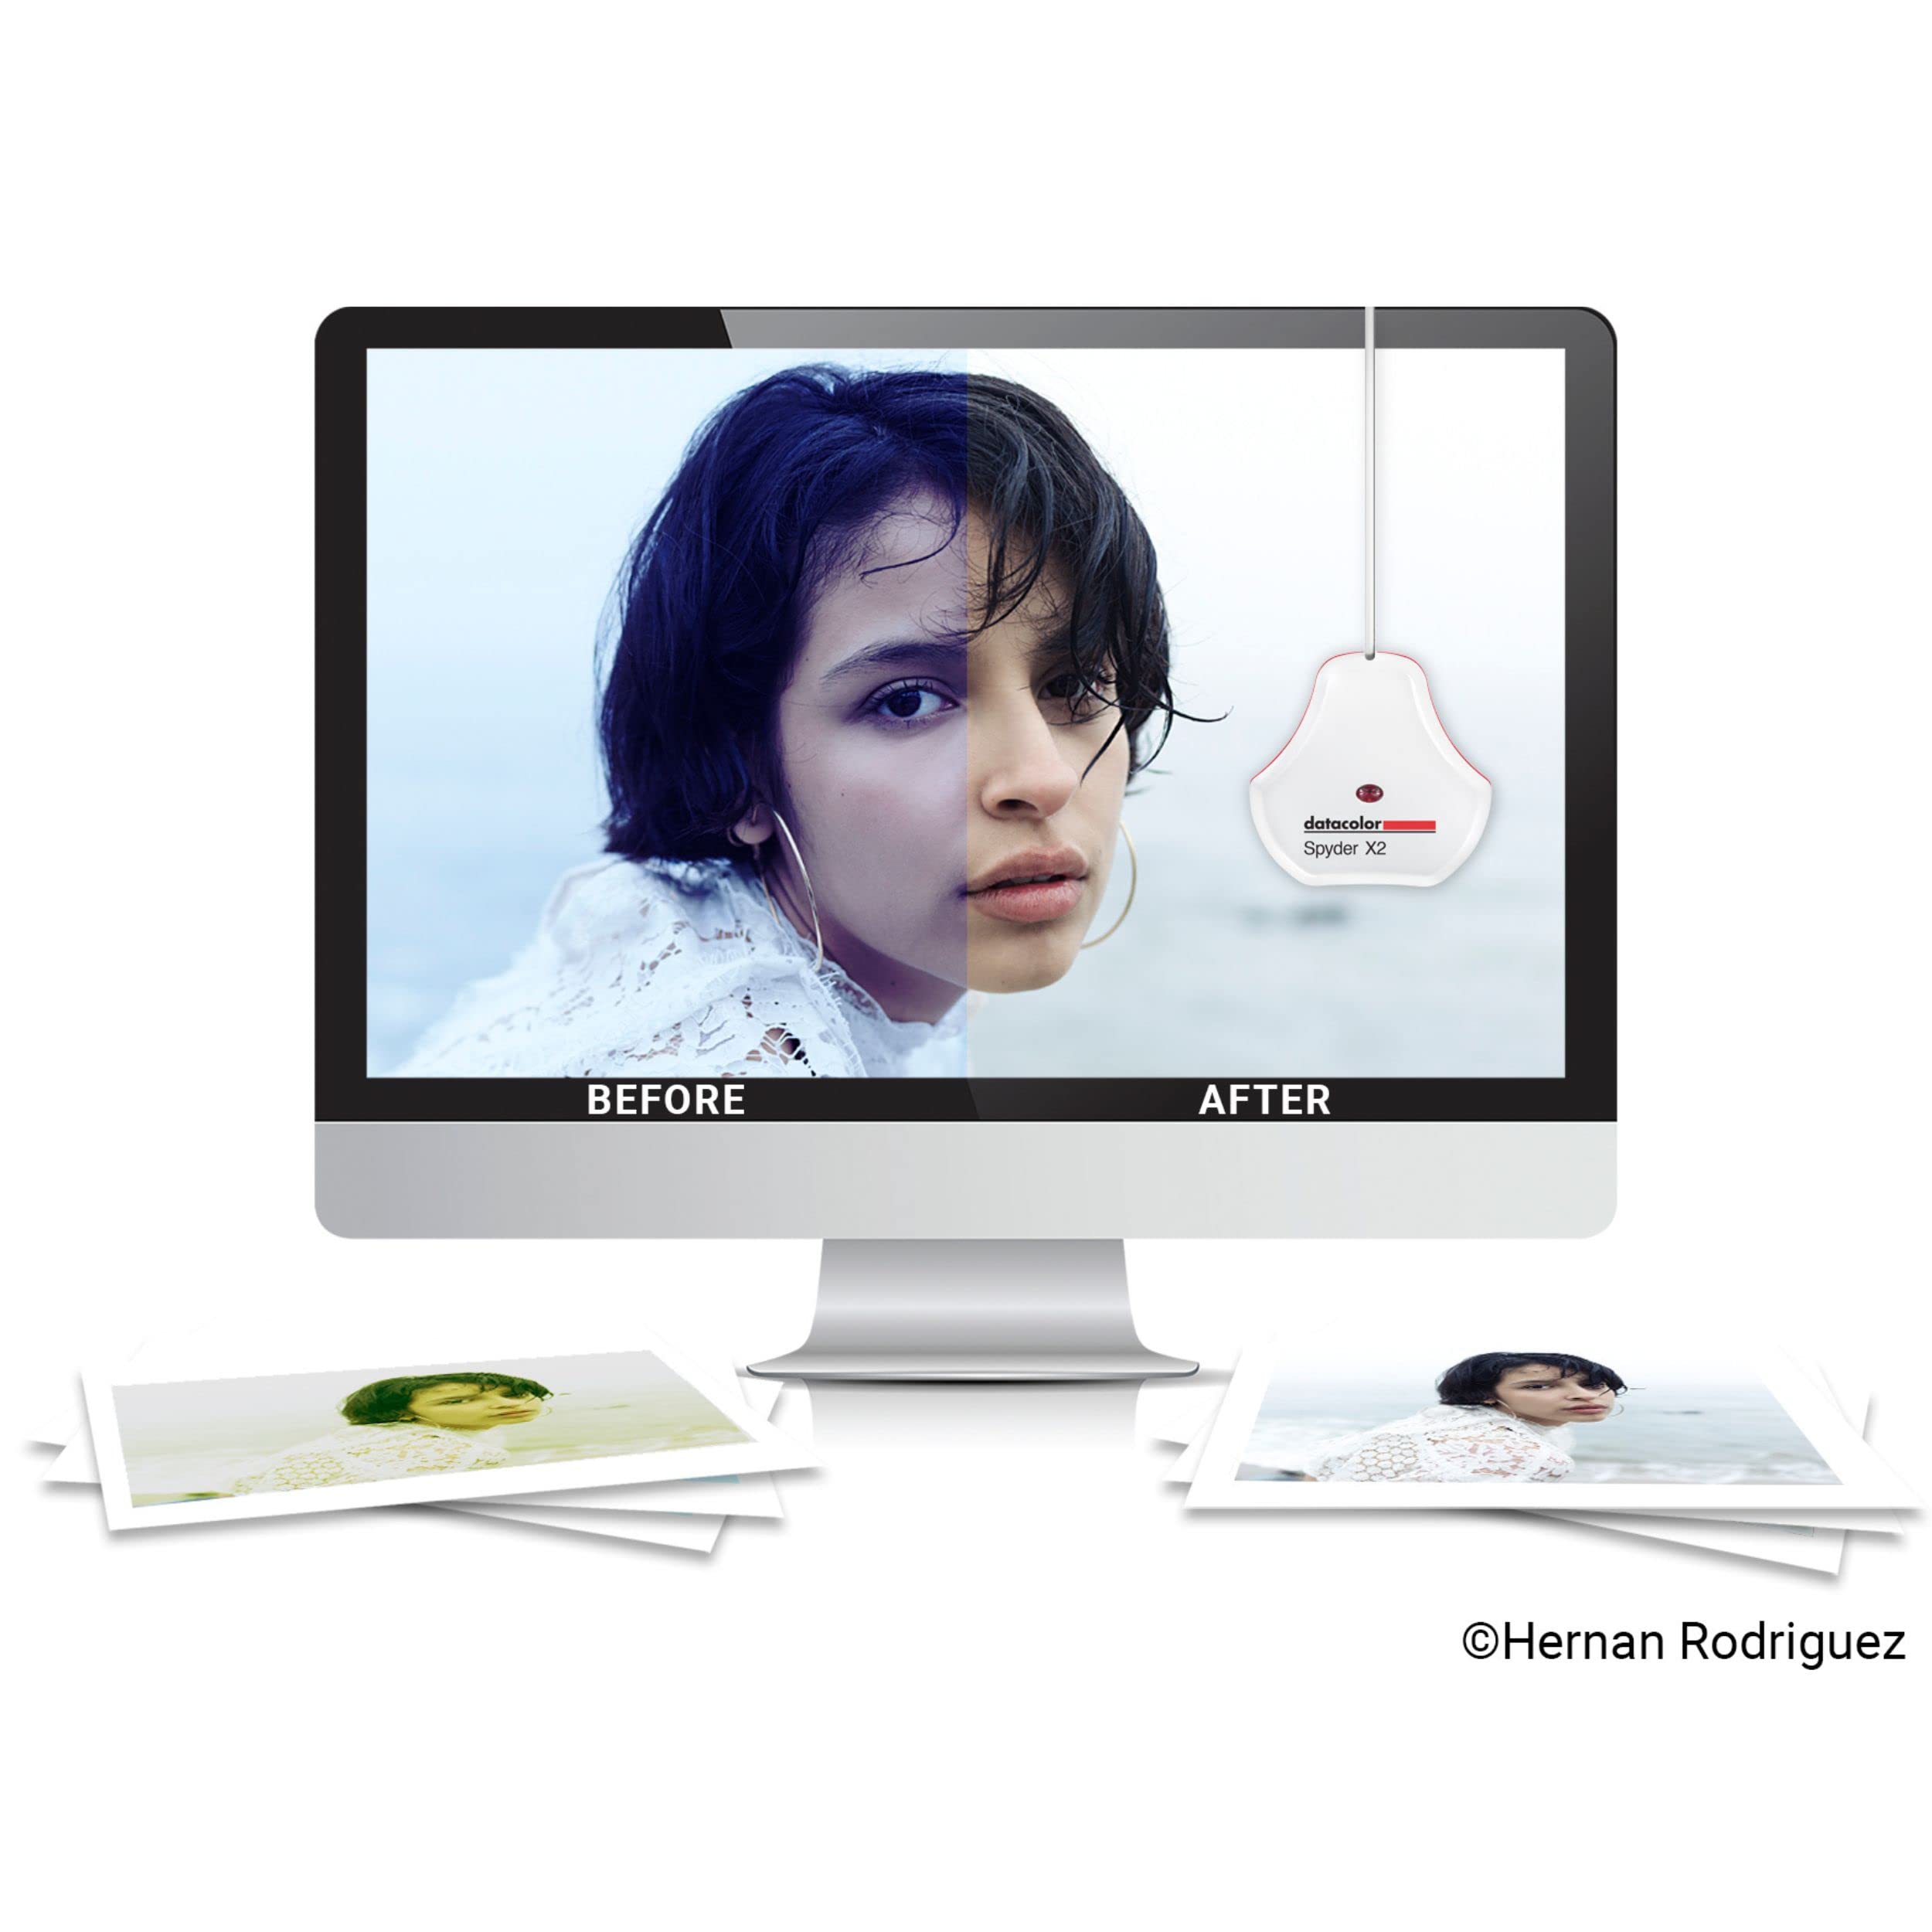 Datacolor Spyder X2 Ultra – High-Brightness Monitor Color Calibrator for Photos, Video & Digital Design Work. Ensures Color Accuracy and Consistency for Monitors